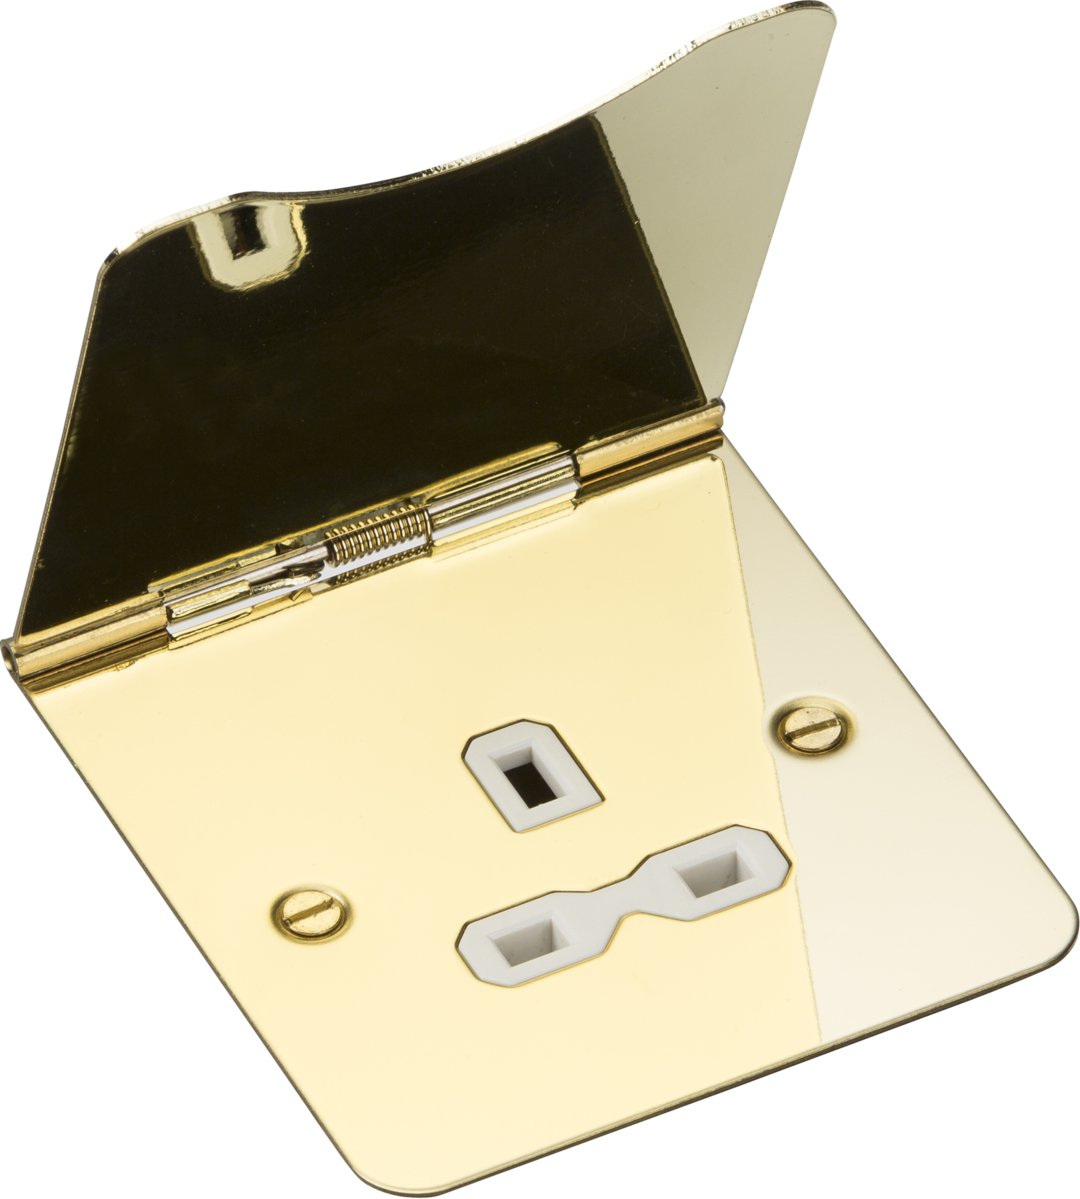 13A 1G unswitched floor socket - polished brass with white insert